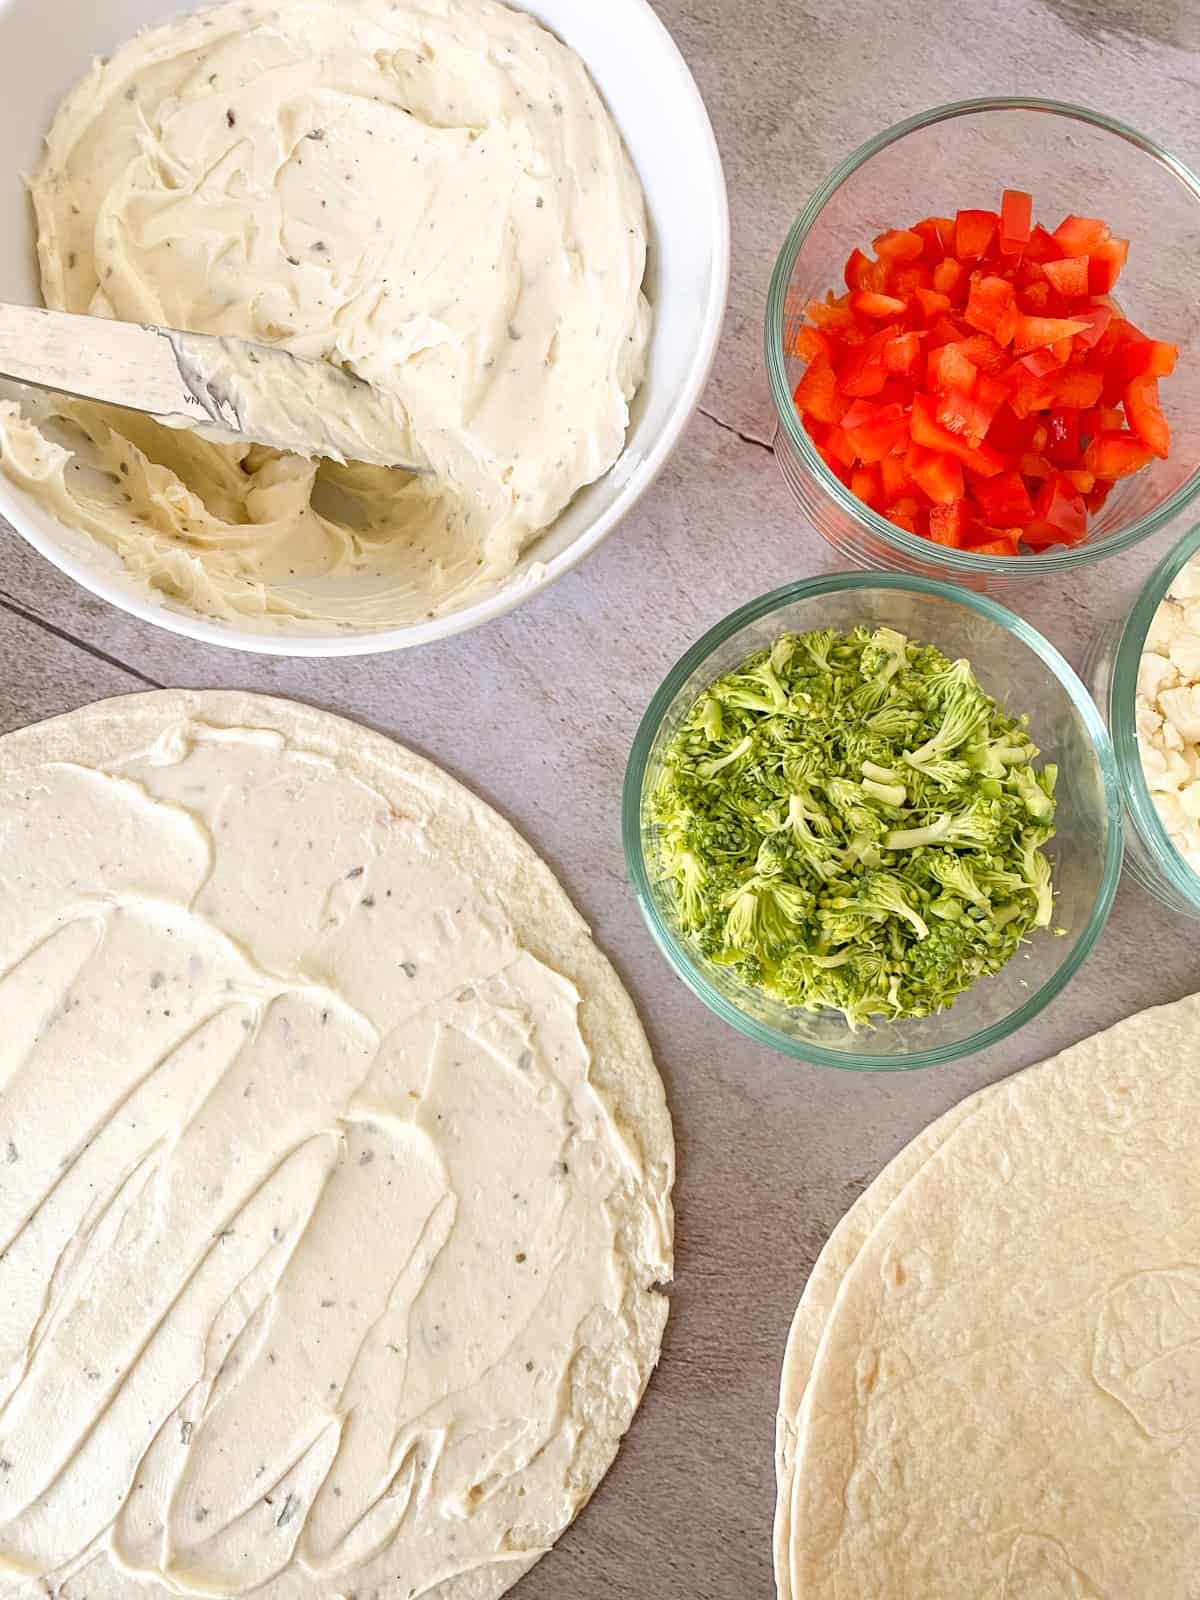 assembling the pinwheels with spread on a tortilla and the ingredients on the side